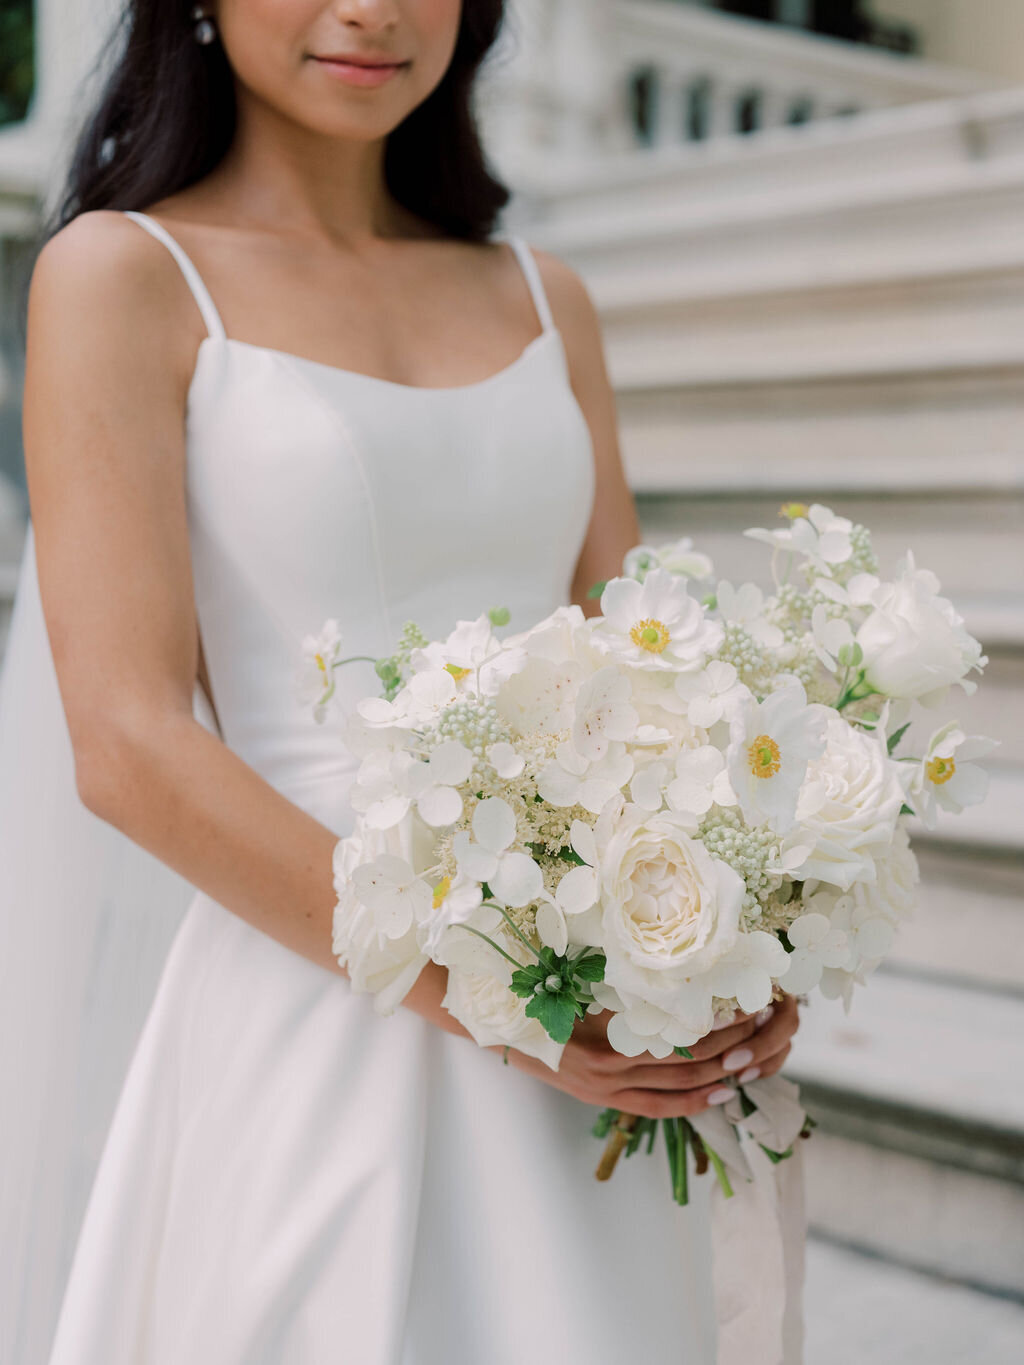 Bride holding bridal bouquet with white garden roses, white Japanese anemone, and white quick-fire hydrangea.